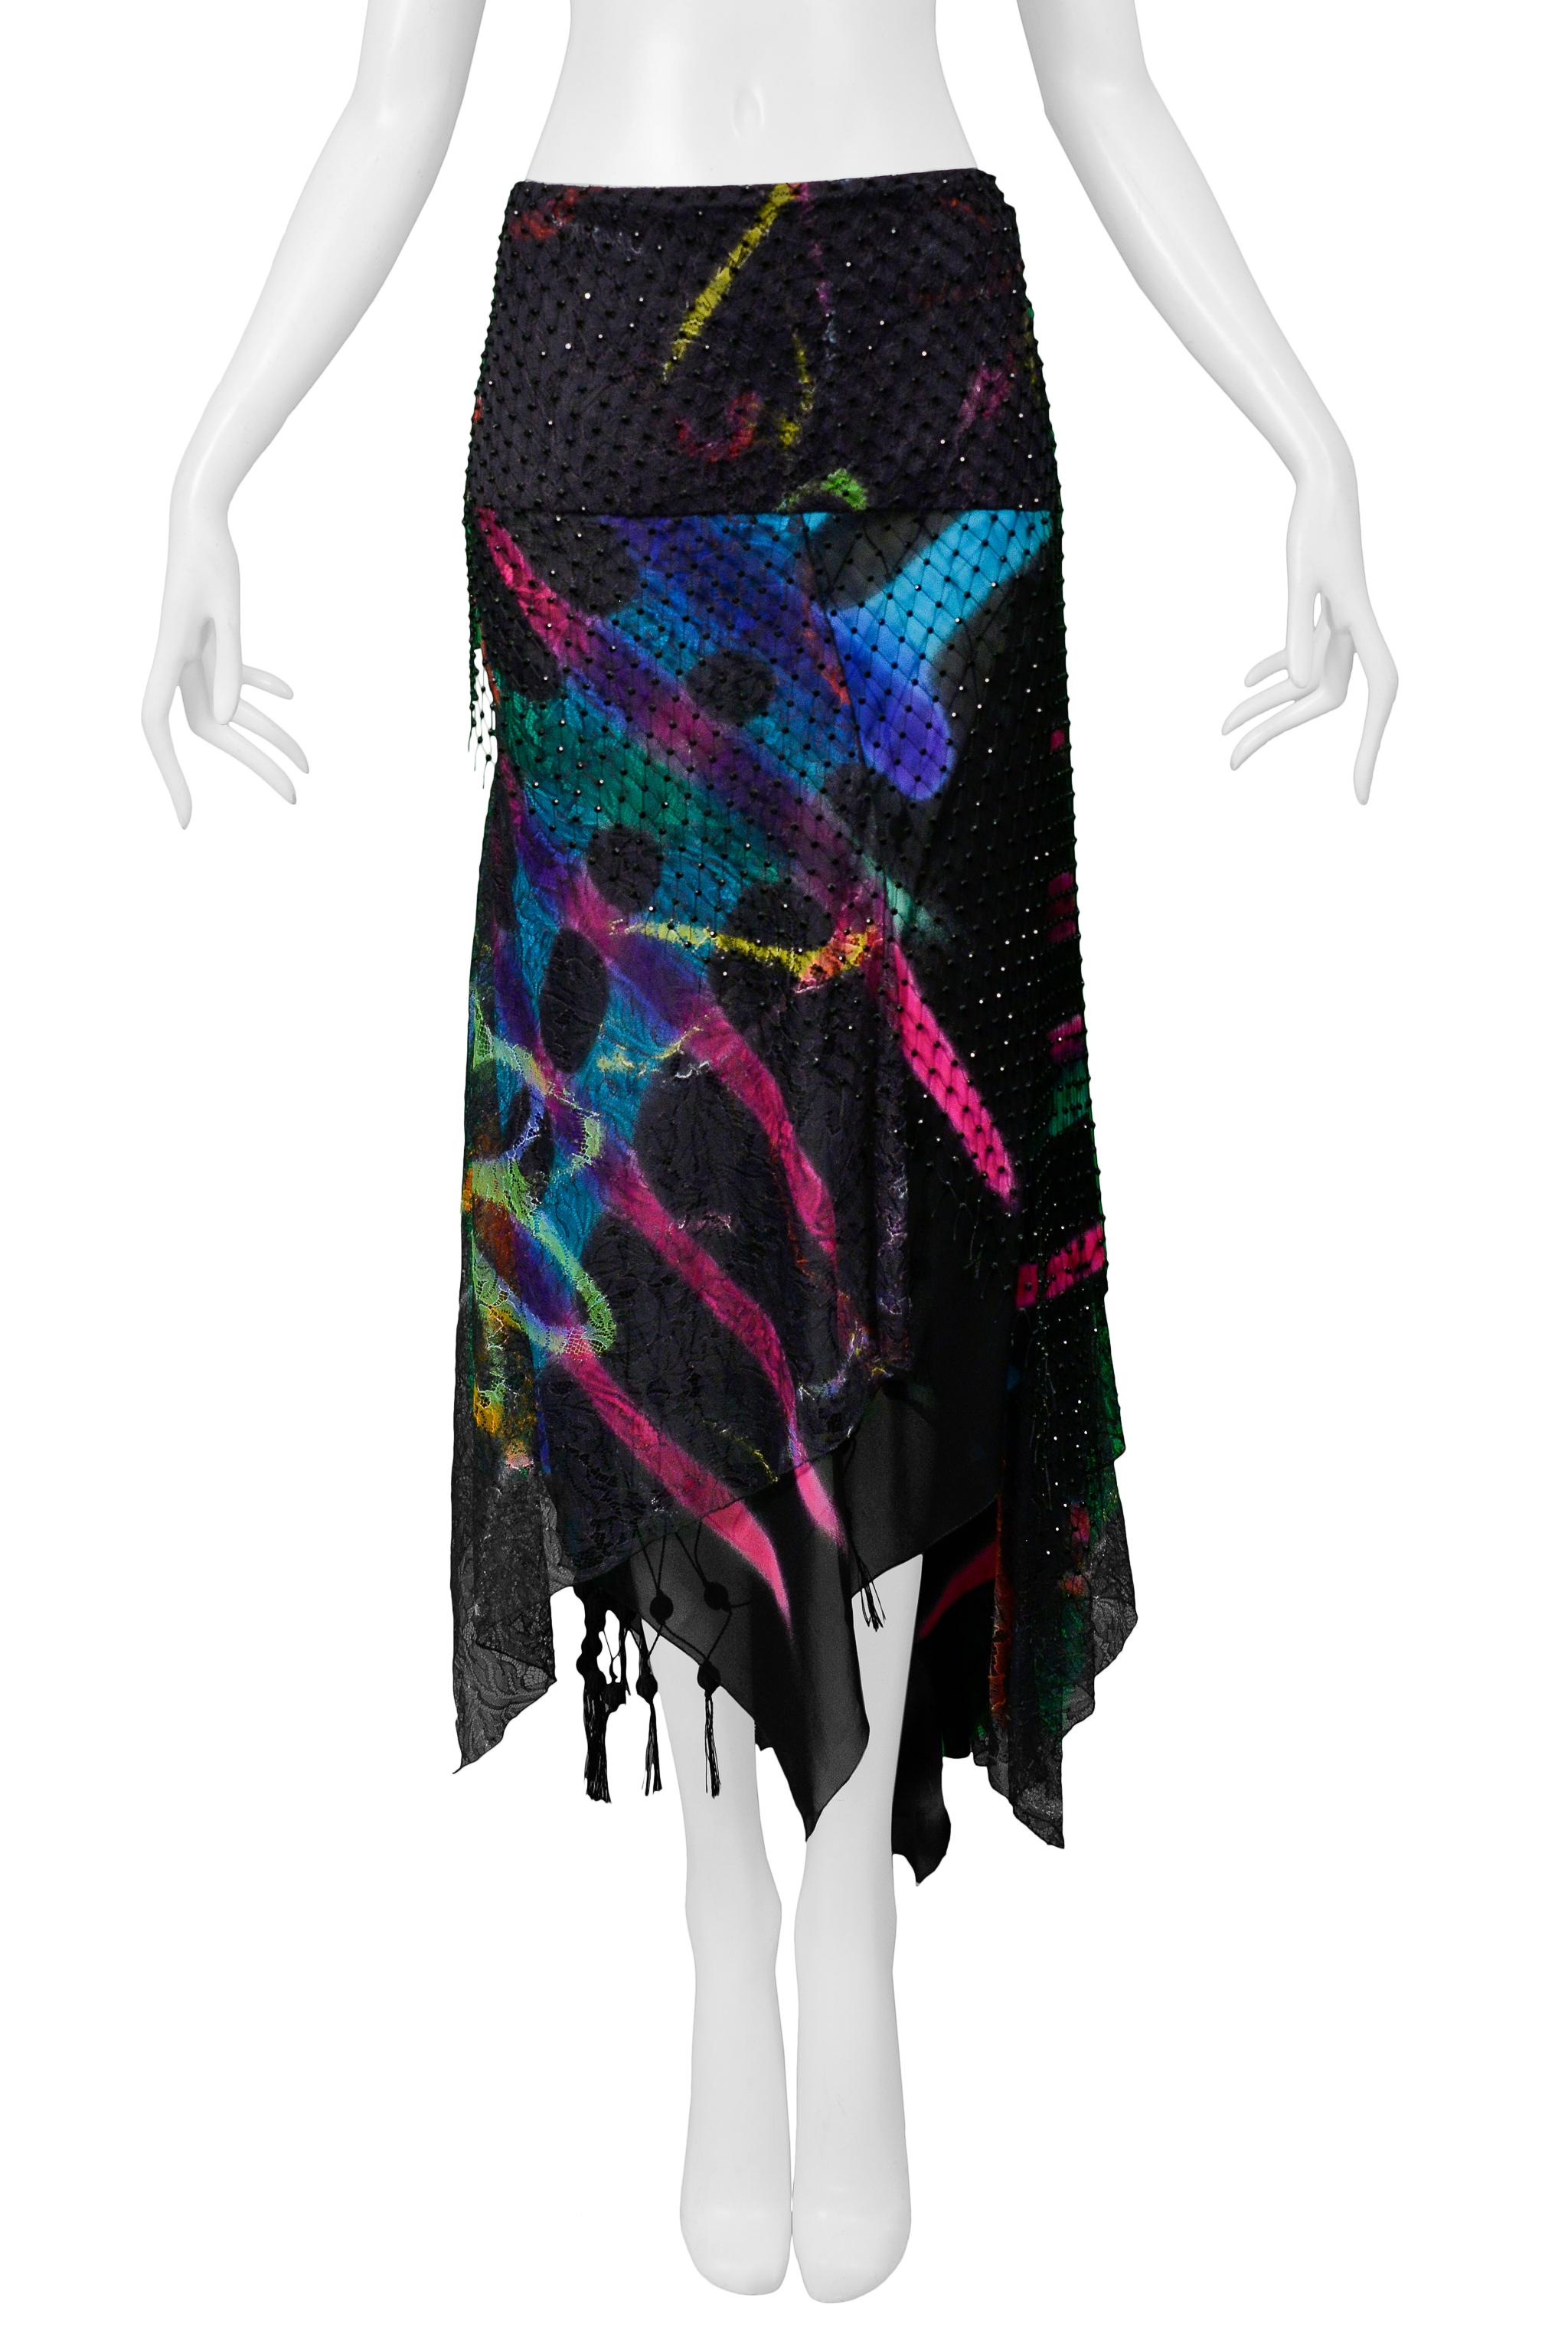 Vintage Versace 2002 Black Silk, Lace & Mesh Graffiti Evening Skirt  In Excellent Condition For Sale In Los Angeles, CA